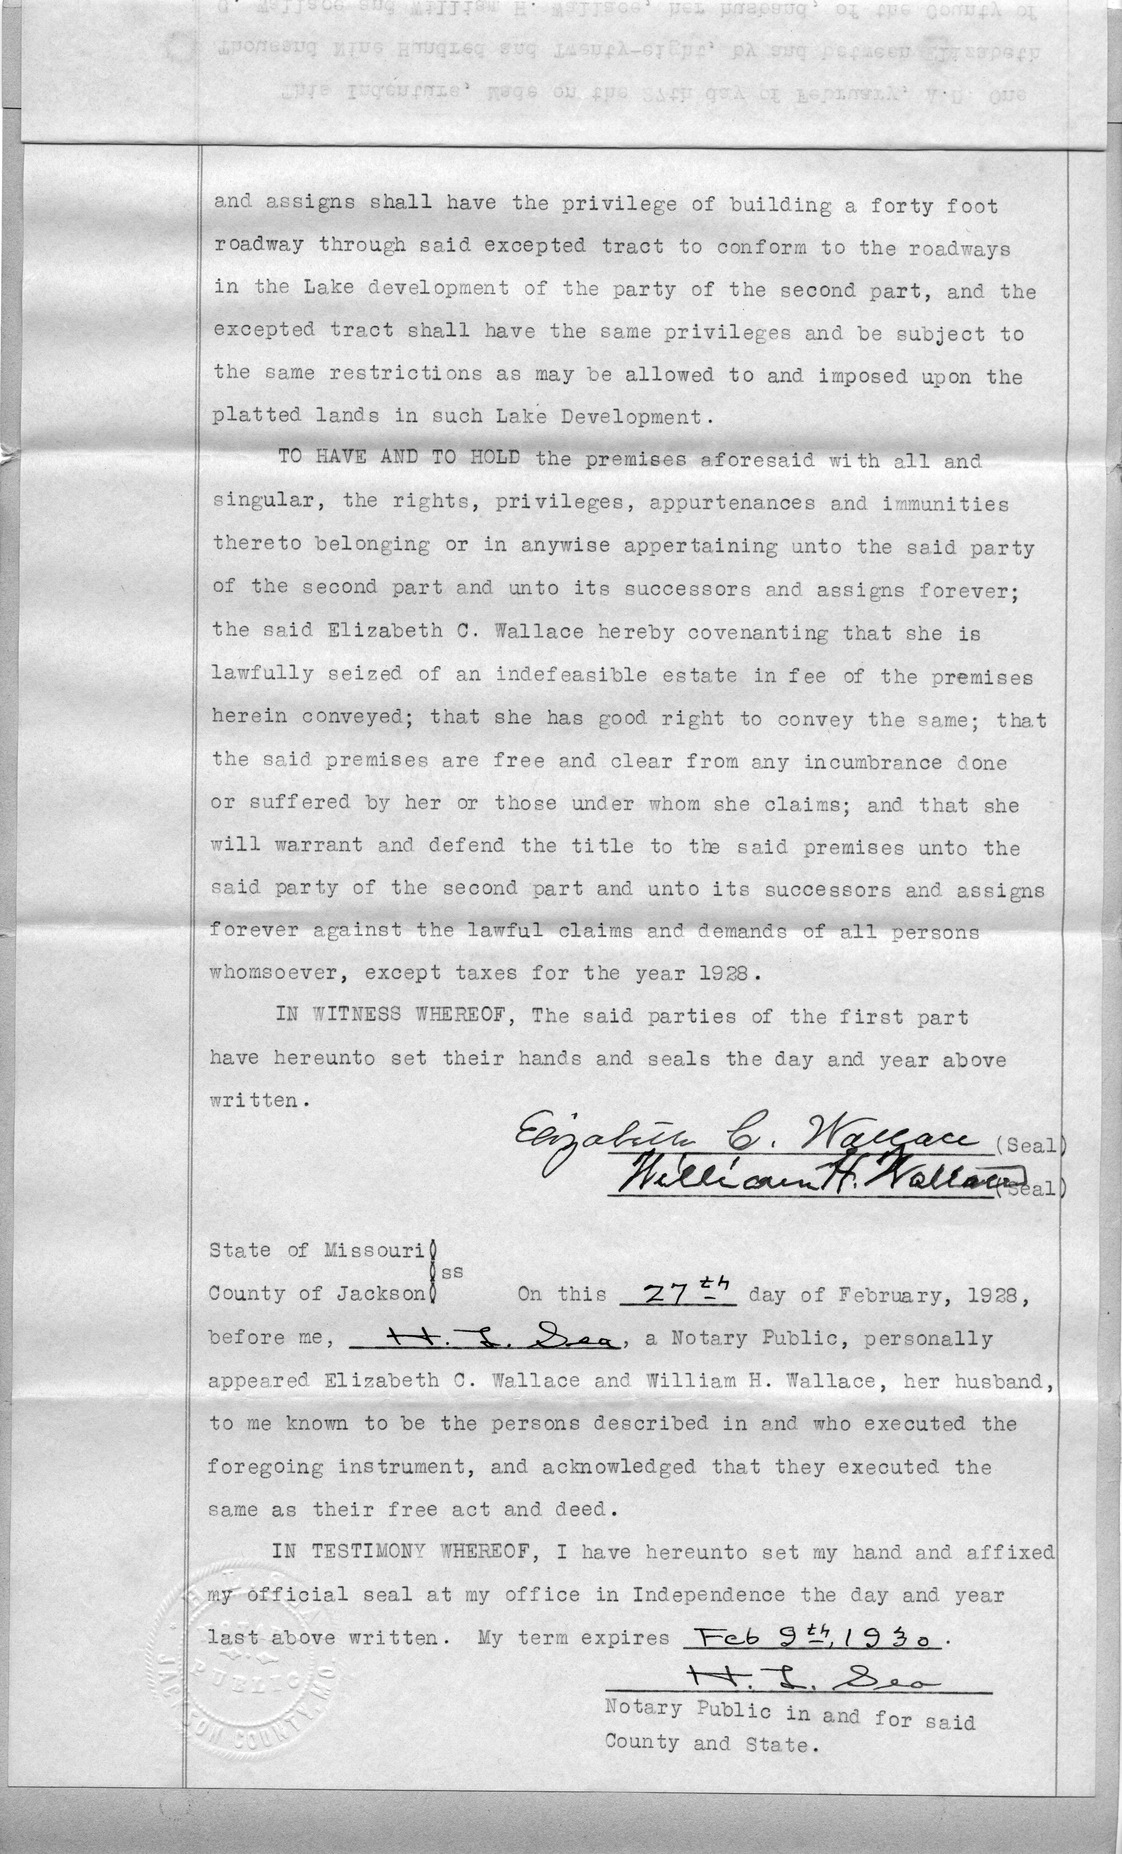 Warranty Deed from Elizabeth C. Wallace and William H. Wallace to Lake Lotawana Development Company